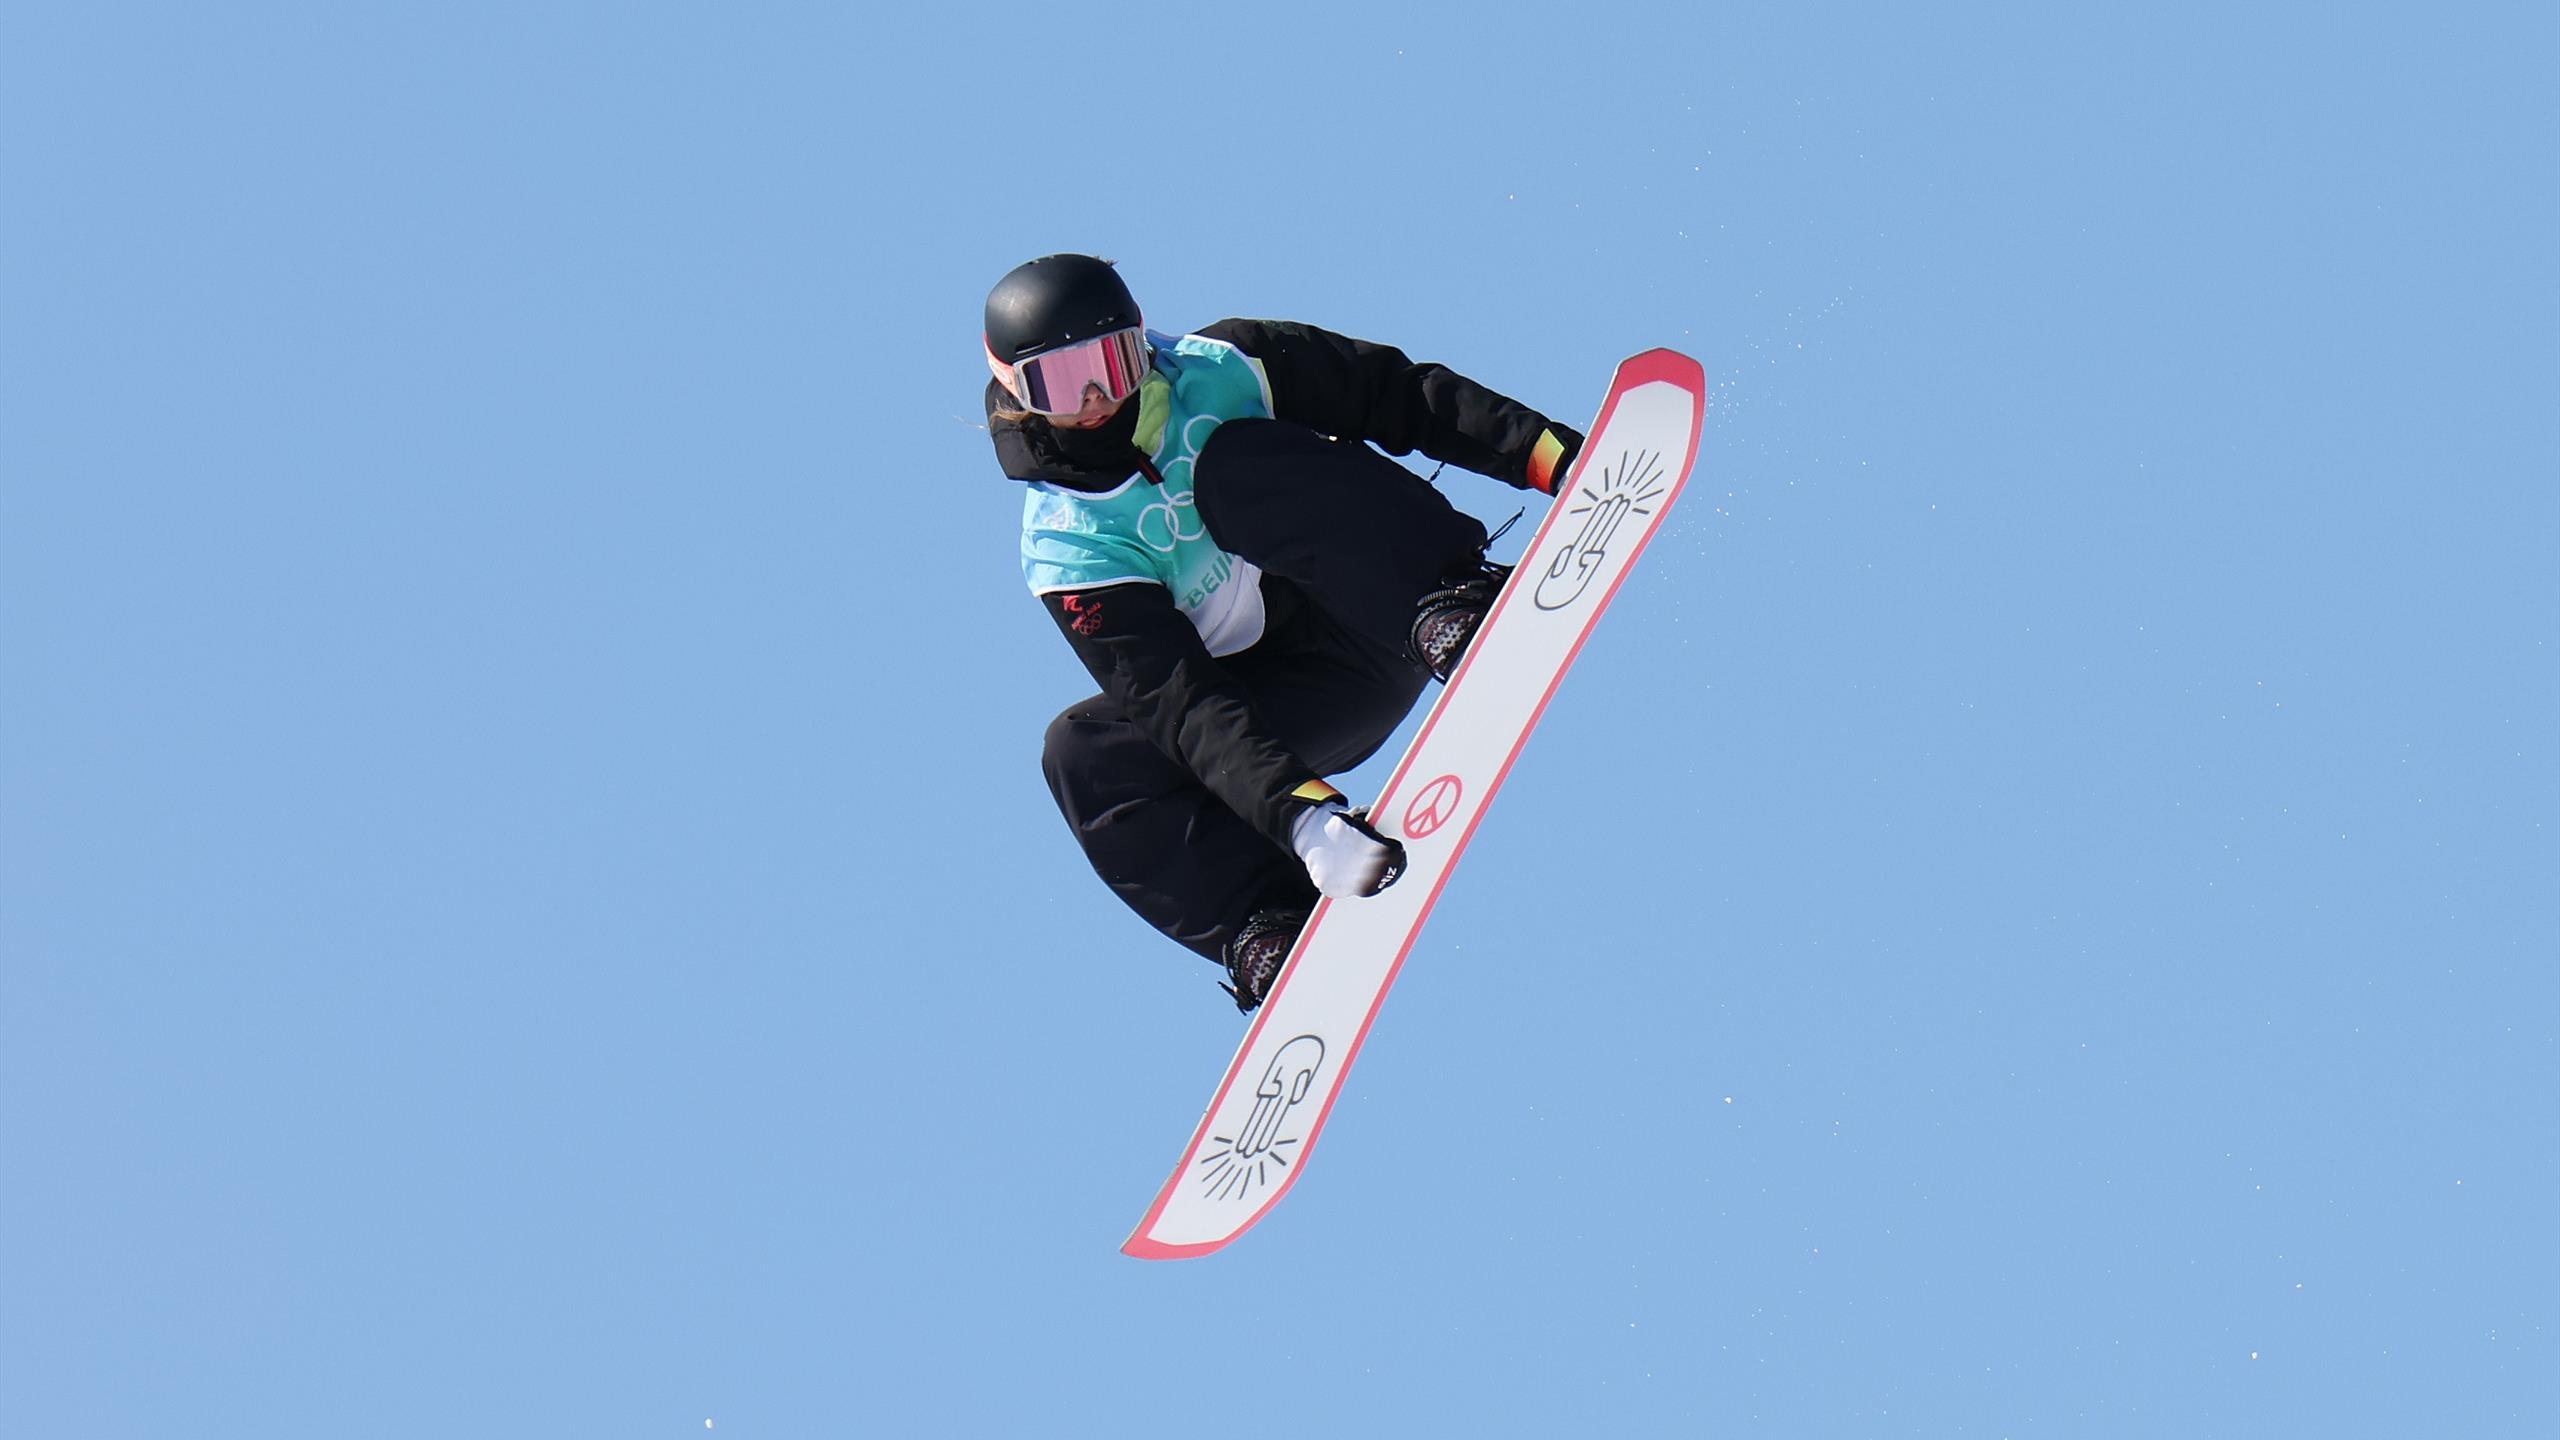 Snowboarding: The 2018 Winter Olympics, Multi-sport event in Pyeongchang County, South Korea. 2560x1440 HD Wallpaper.